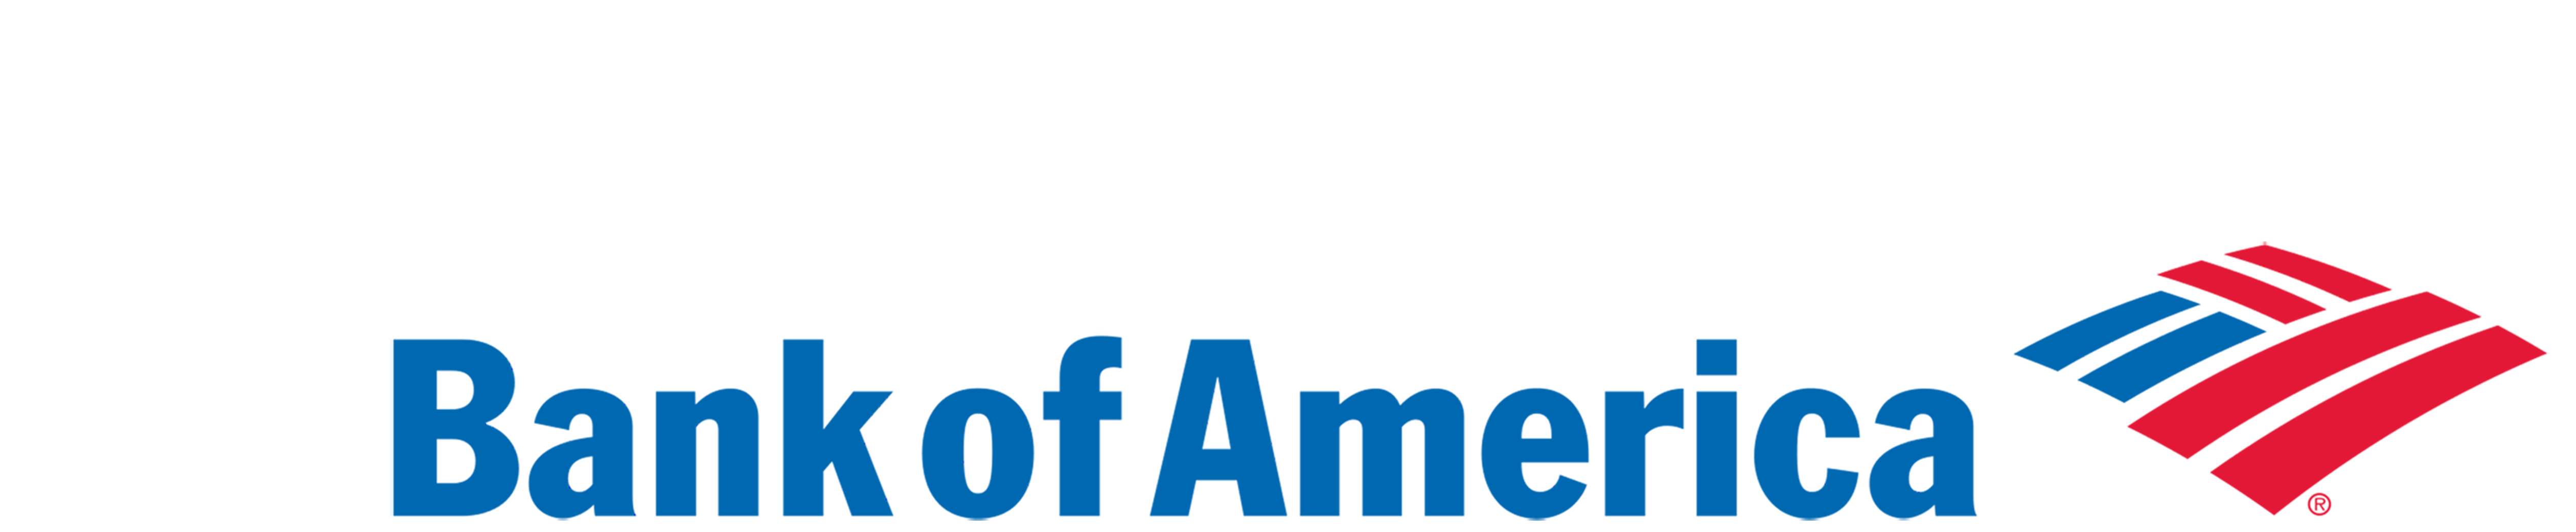 Bank Of America Logo Vector At Collection Of Bank Of